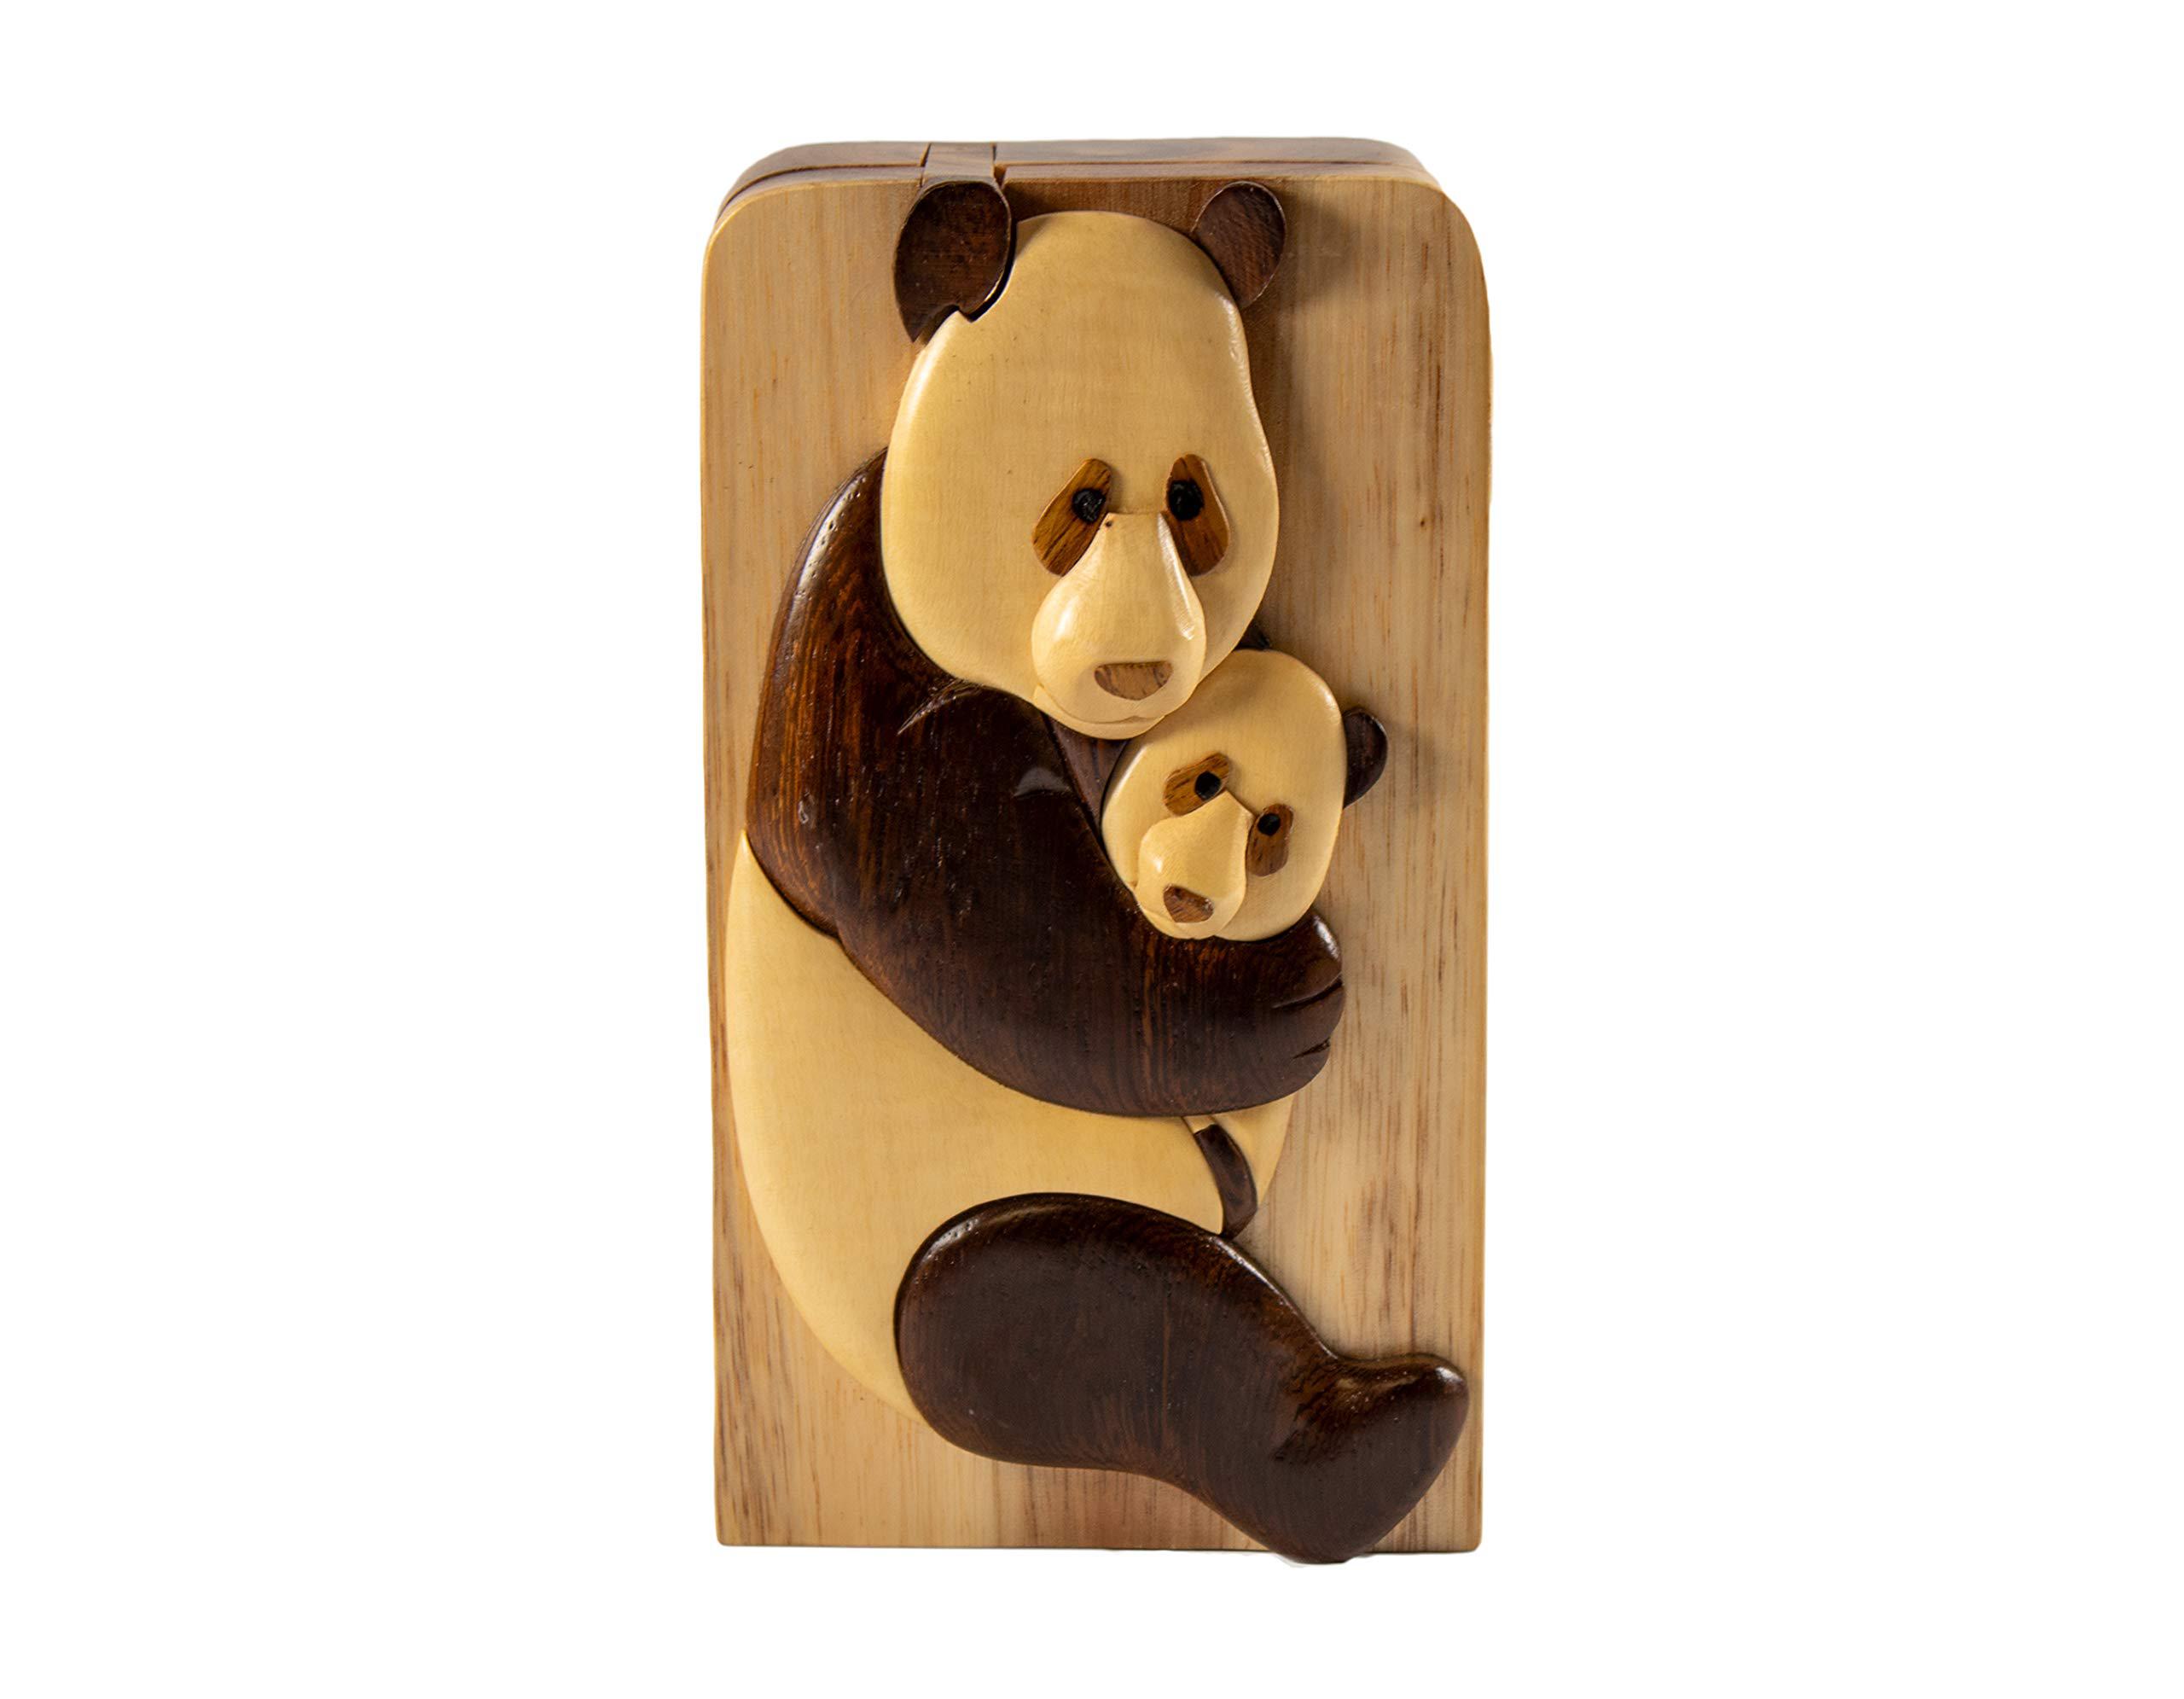 carver dan\'s shop panda and baby mother's love new addition hand-carved puzzle box with no paints! no stains! hidden felt lined interior that h